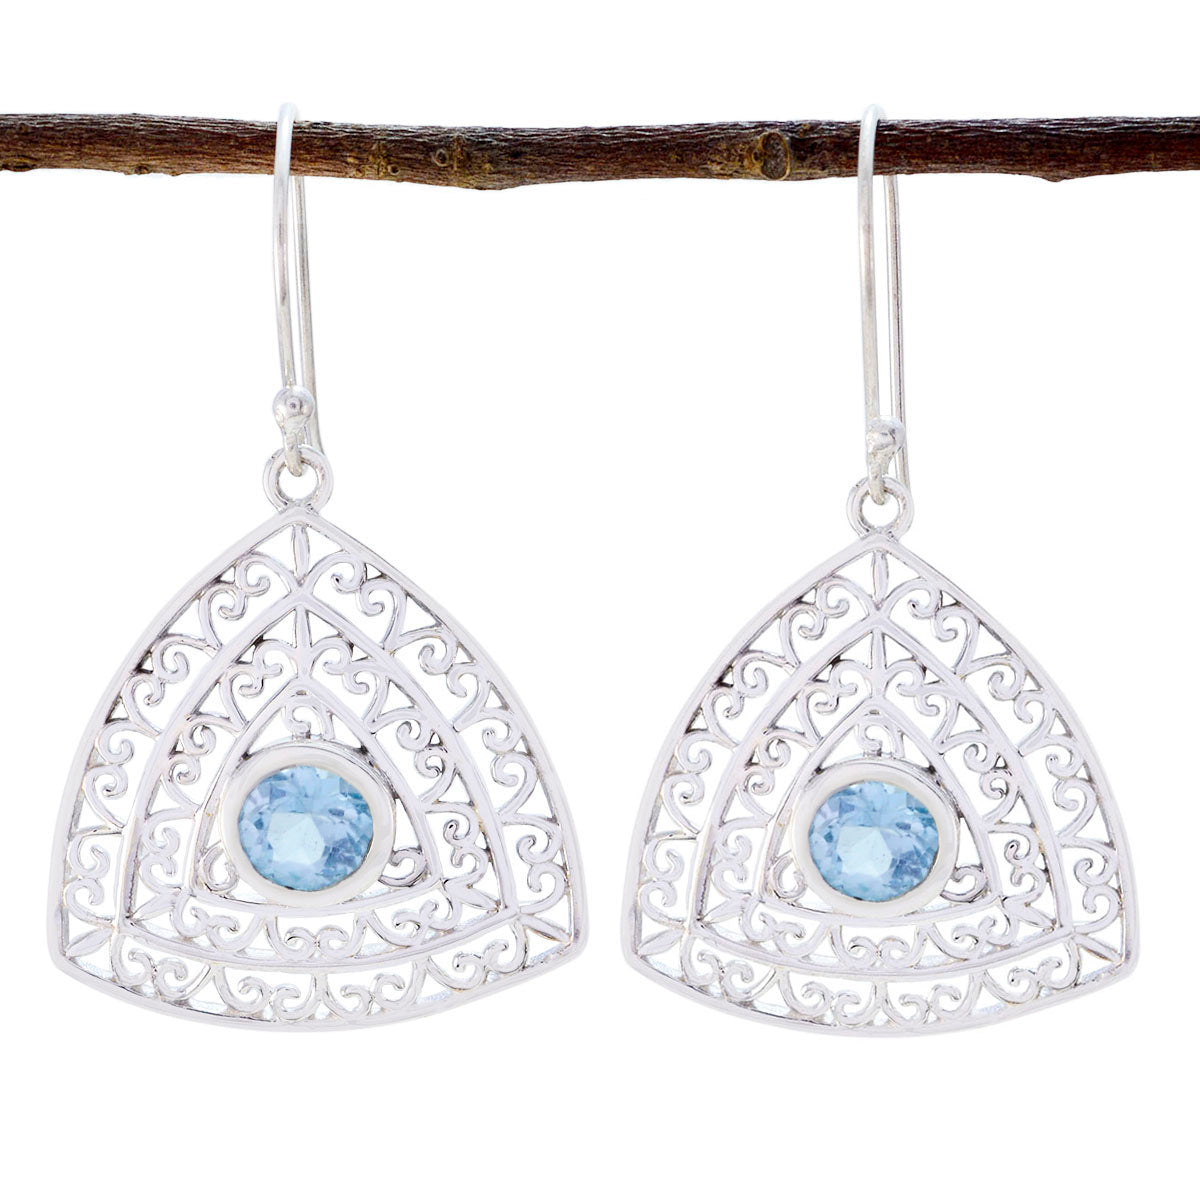 Riyo Real Gemstones round Faceted Blue Topaz Silver Earrings gift for good